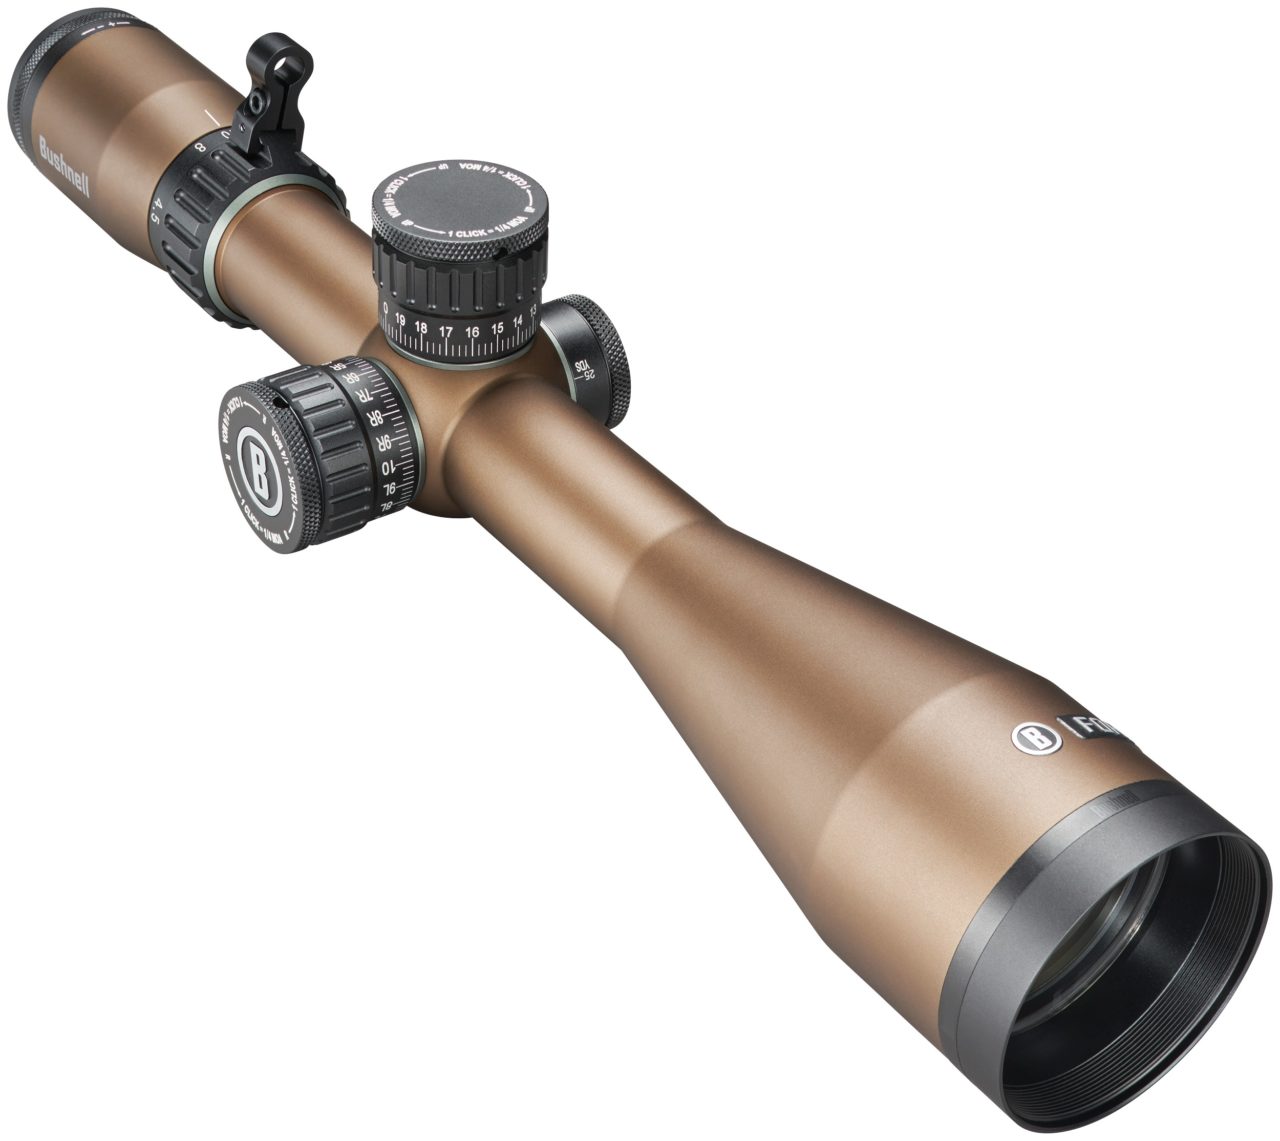 Bushnell Announces Three New Premium Hunting Optic Lines Designed to Provide Clarity in Any Condition